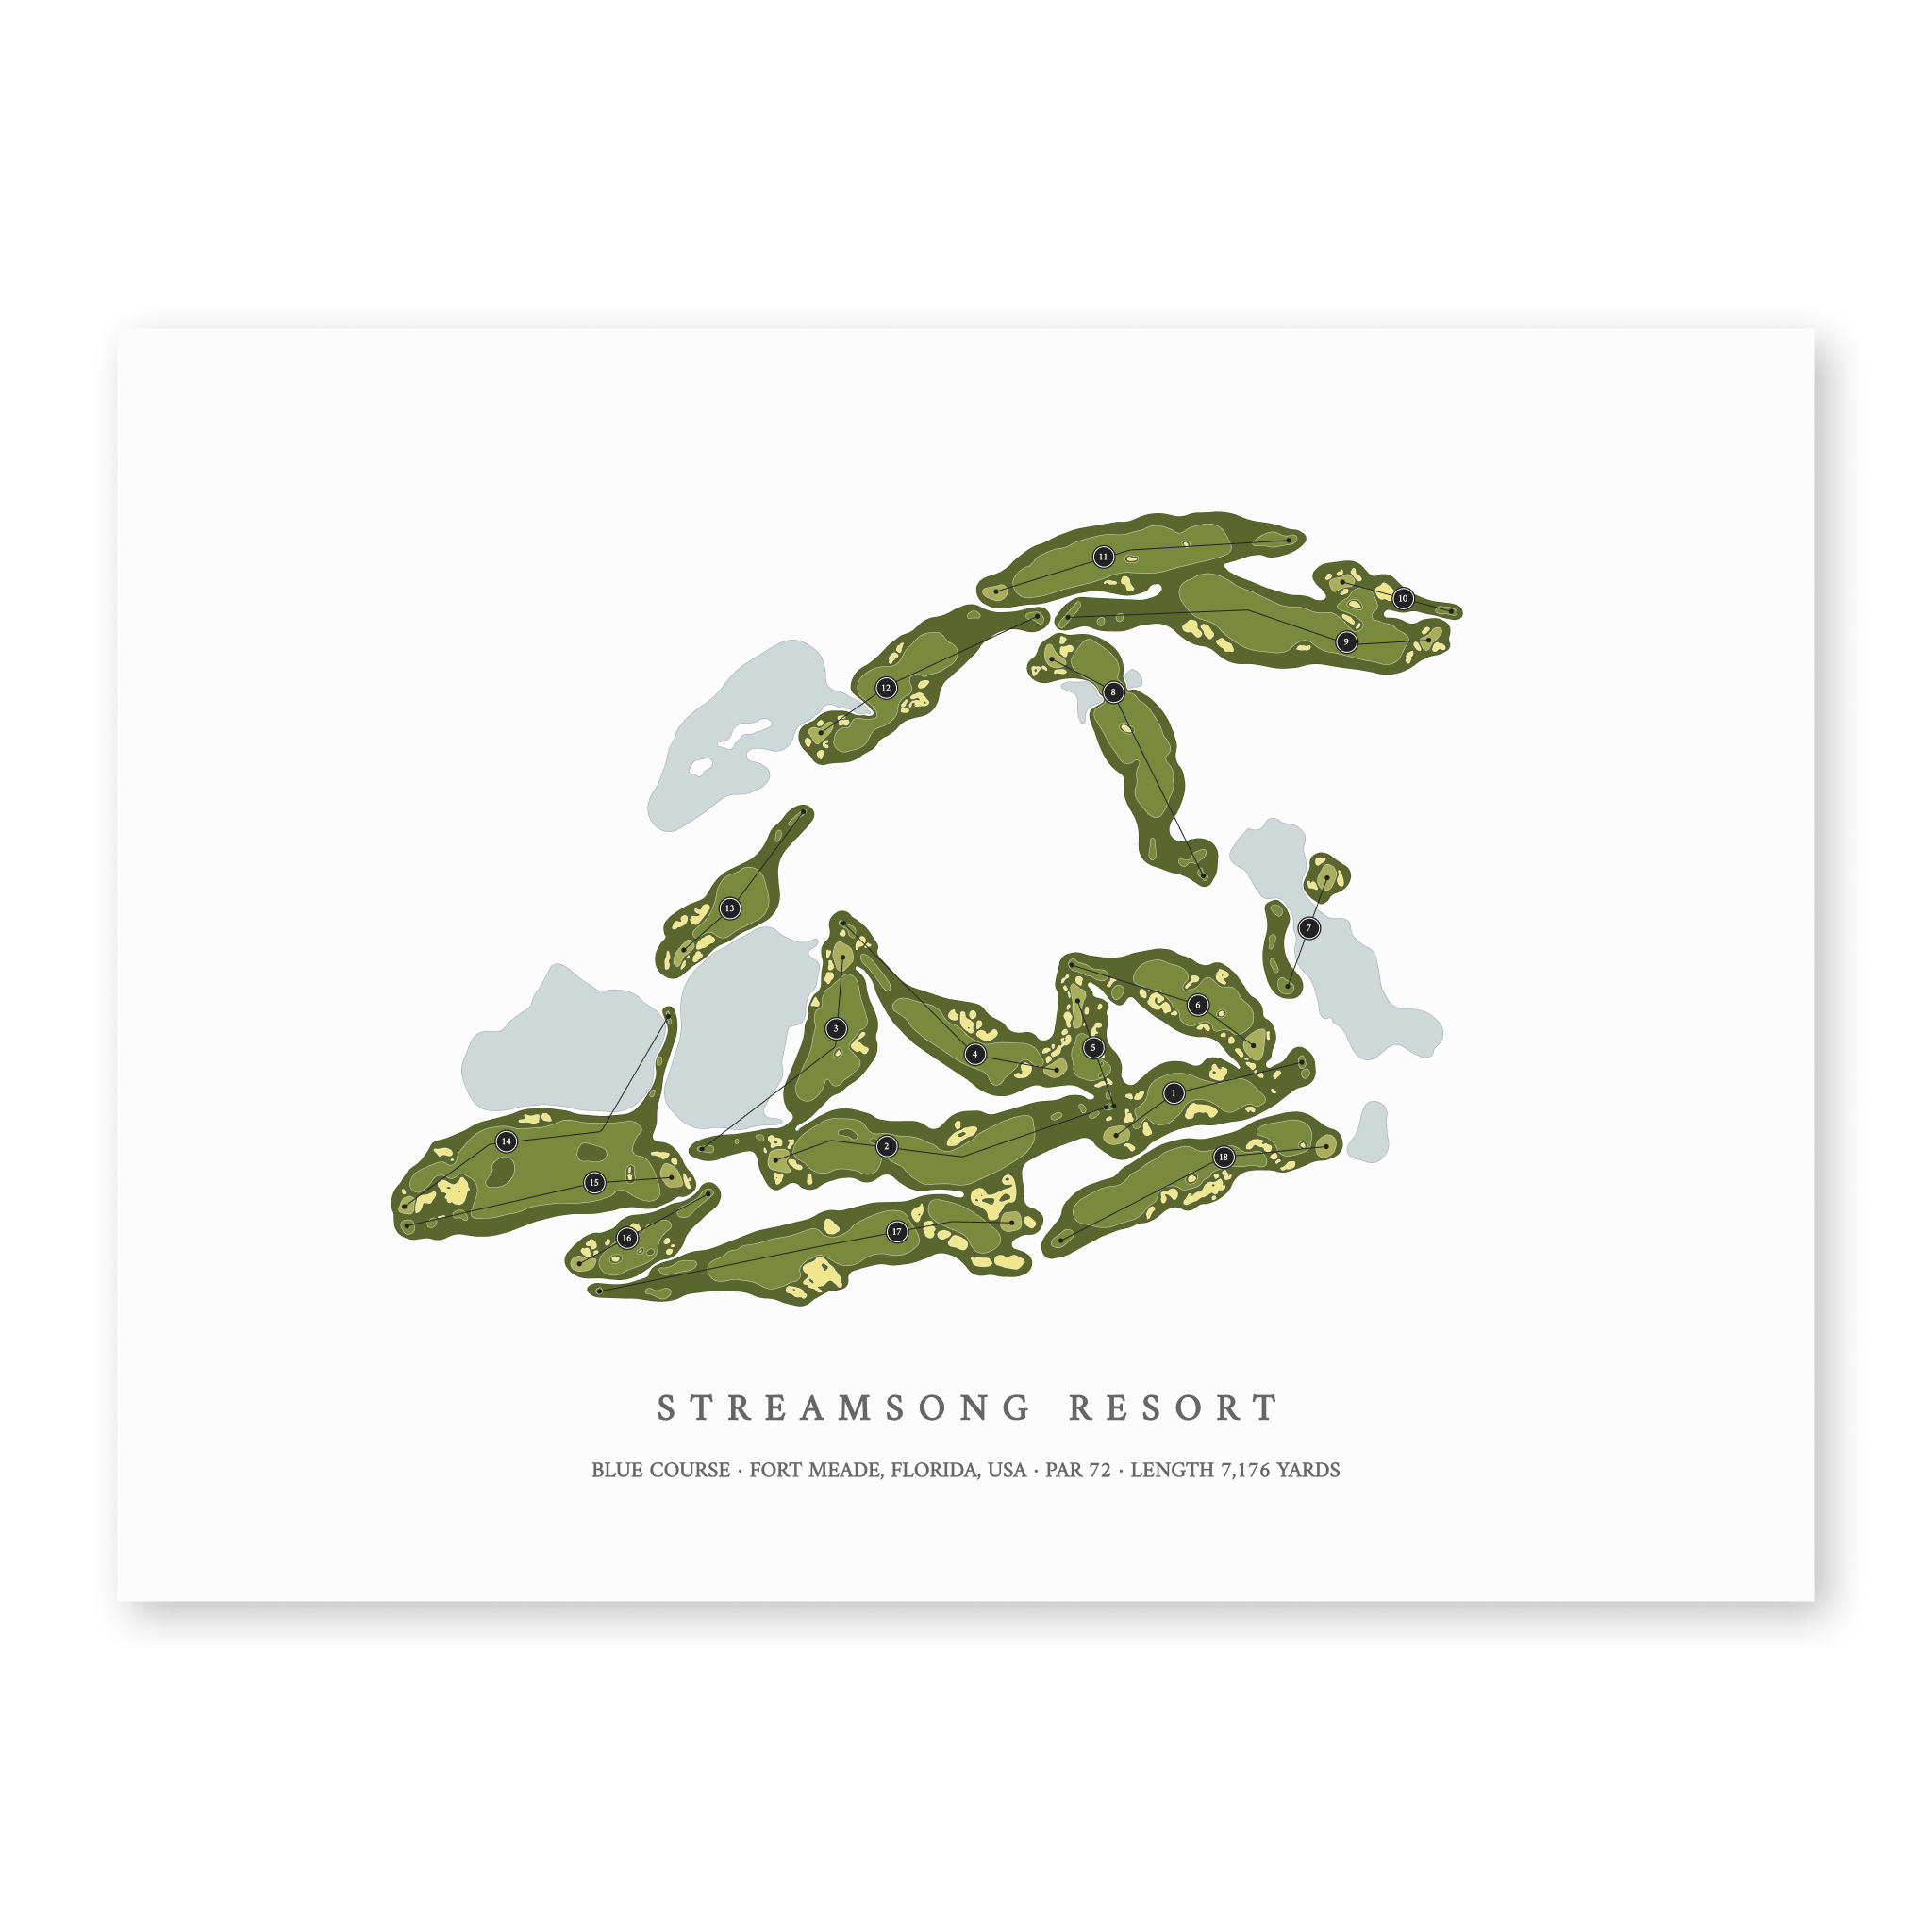 Streamsong Resort - Blue Course | Golf Course Map | Unframed 